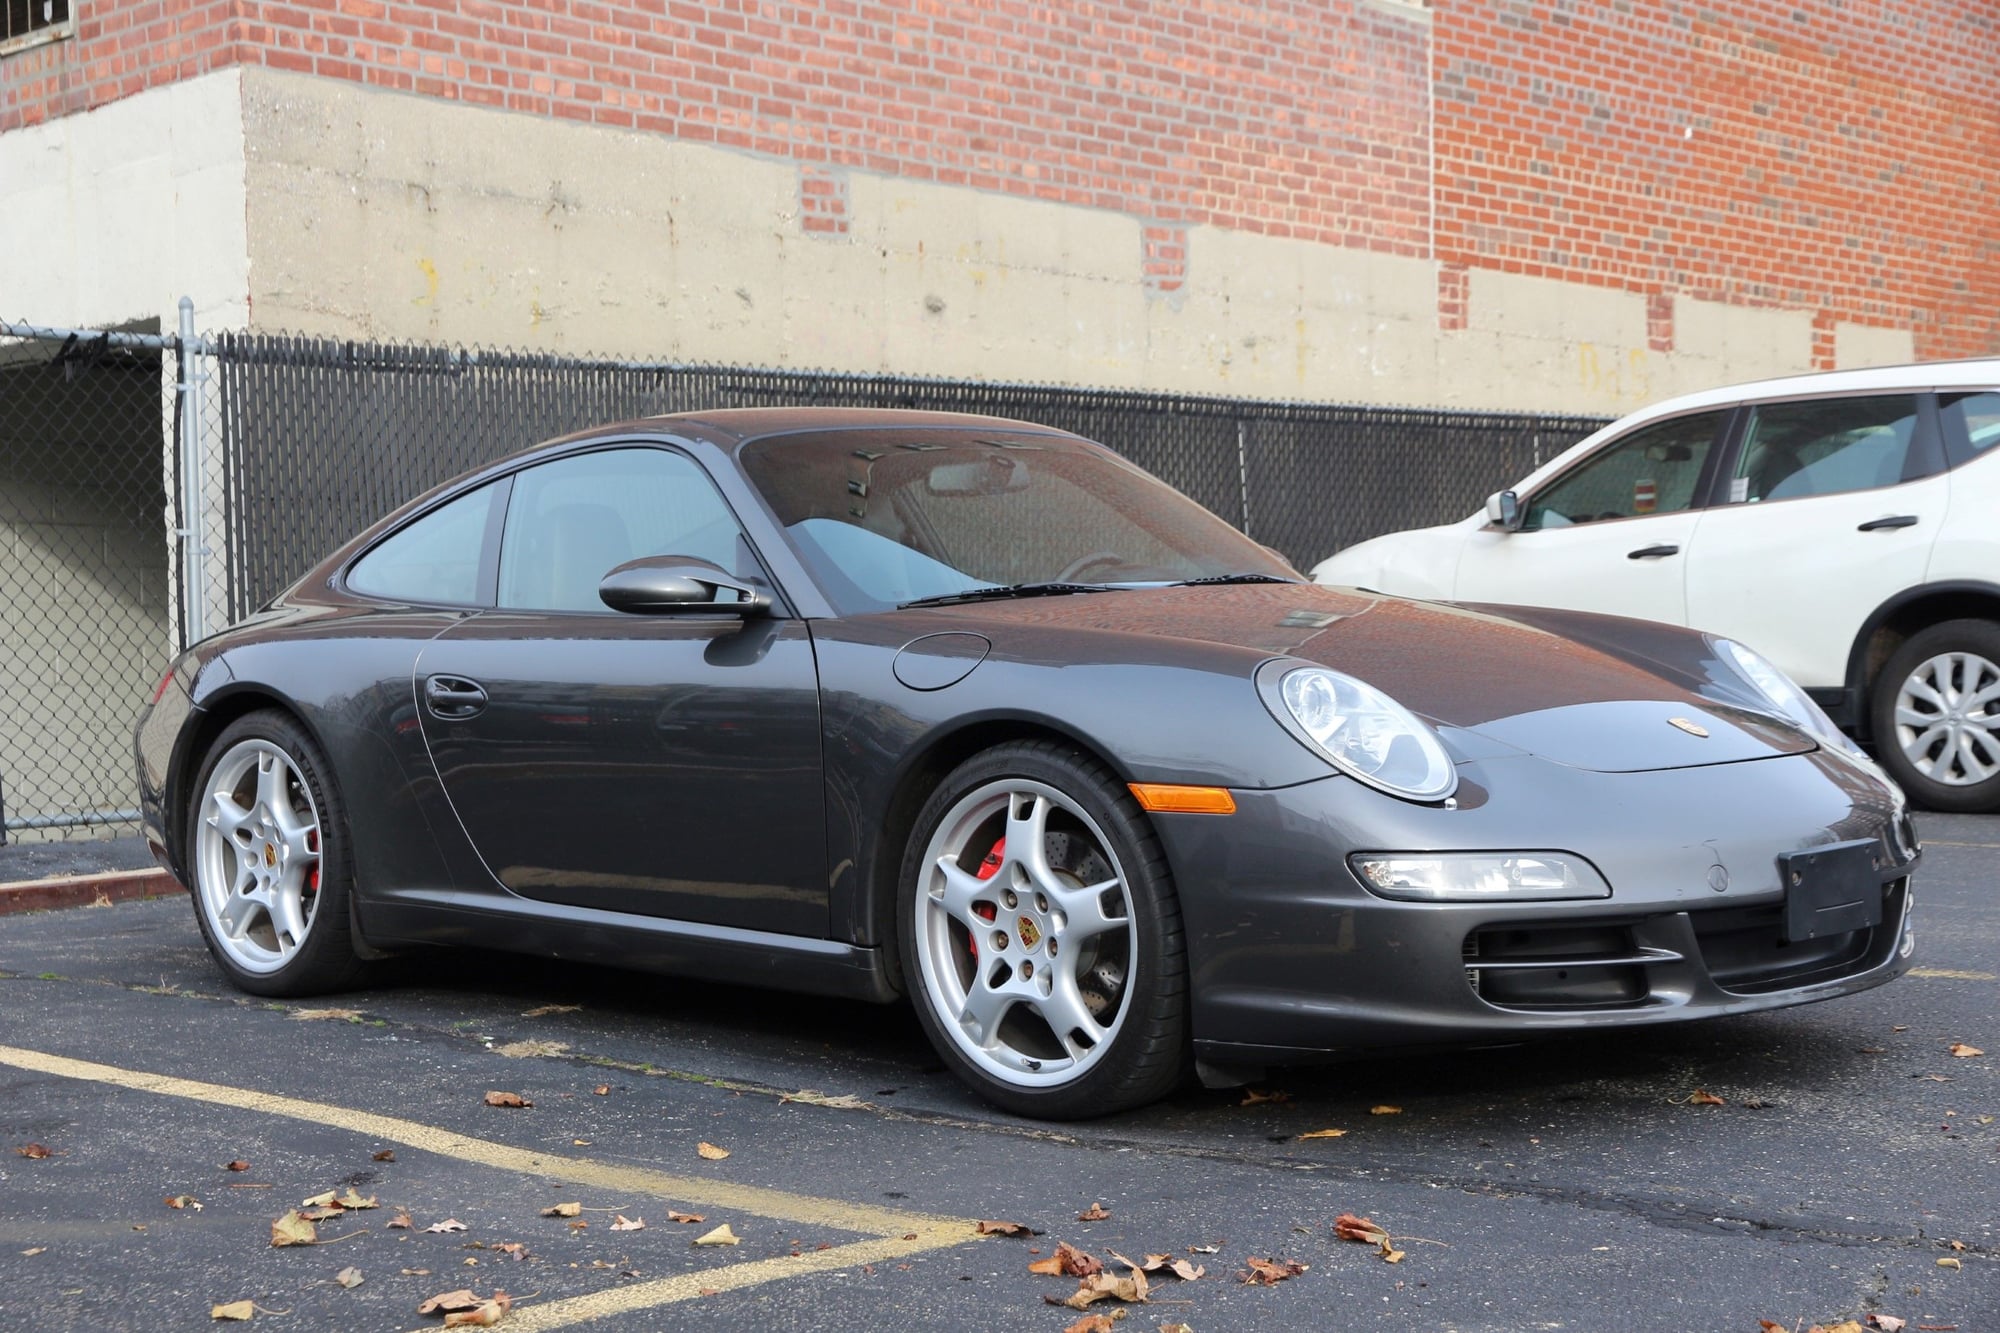 2006 Porsche 911 - 2006 Porsche 911 Carrera S 997.1 Manual *NYC* - Used - VIN WP0AB29946S740868 - 69,500 Miles - 6 cyl - 2WD - Manual - Coupe - Gray - Queens, NY 11415, United States